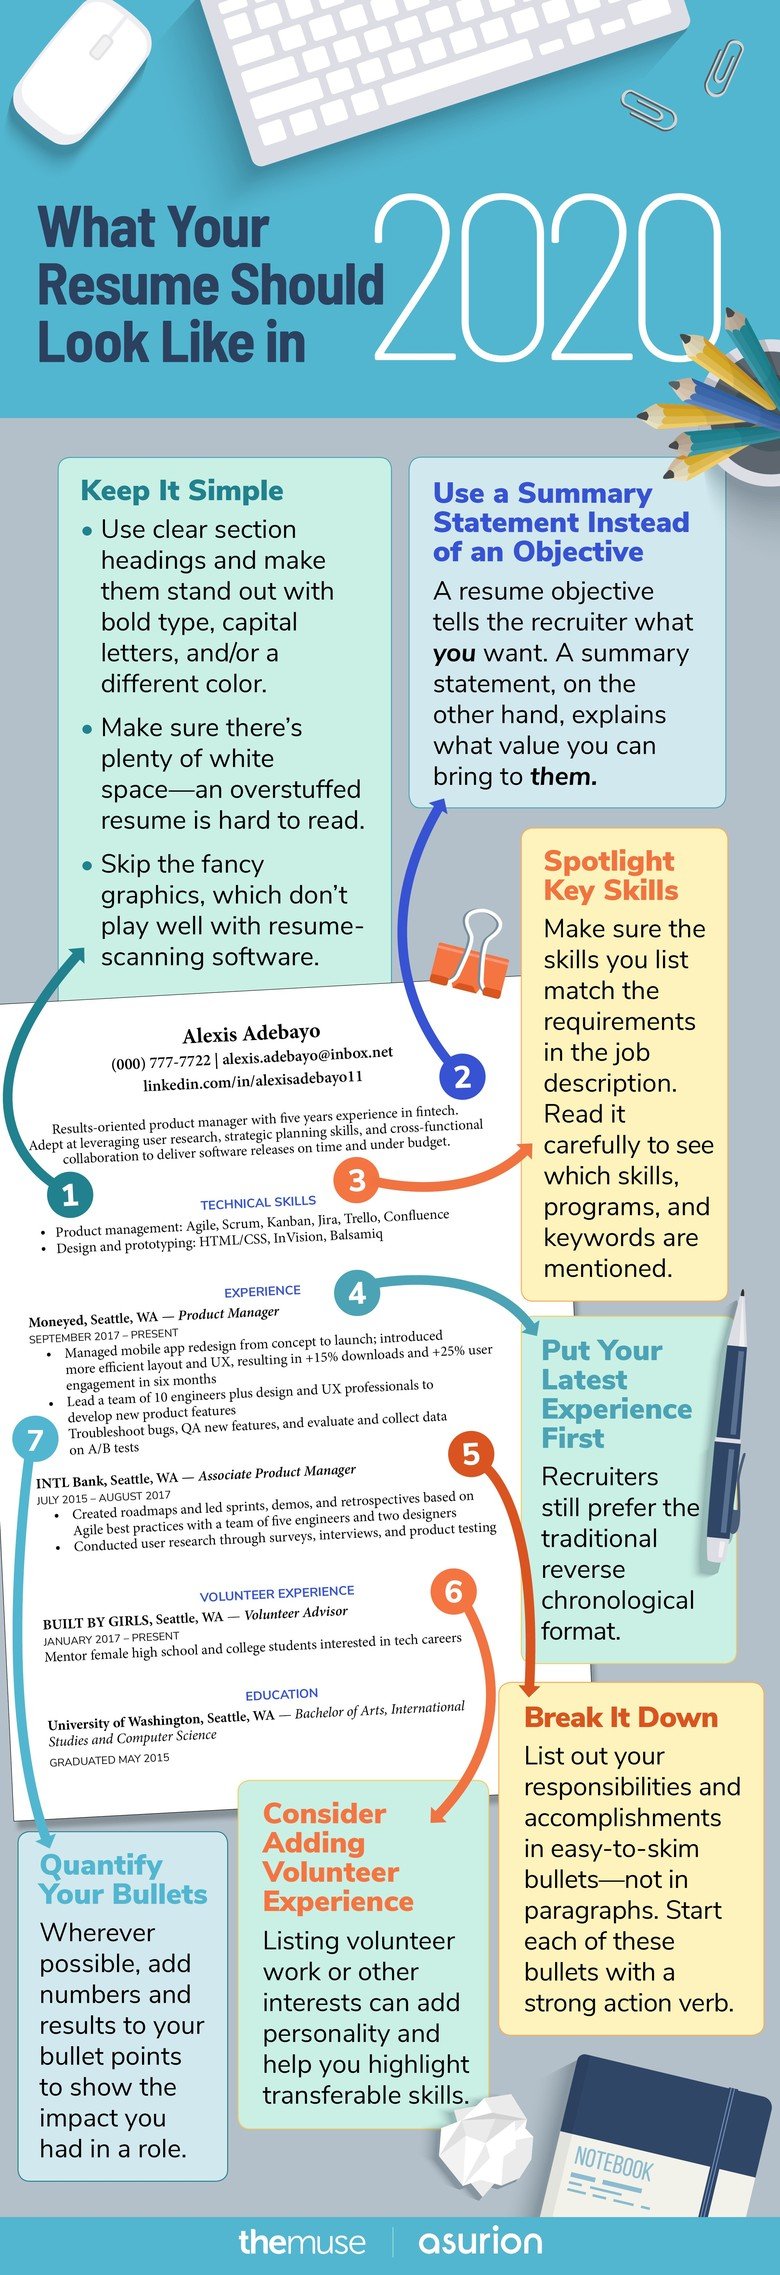 what your resume should look like in 2020 illustration of a resume with numbered tips